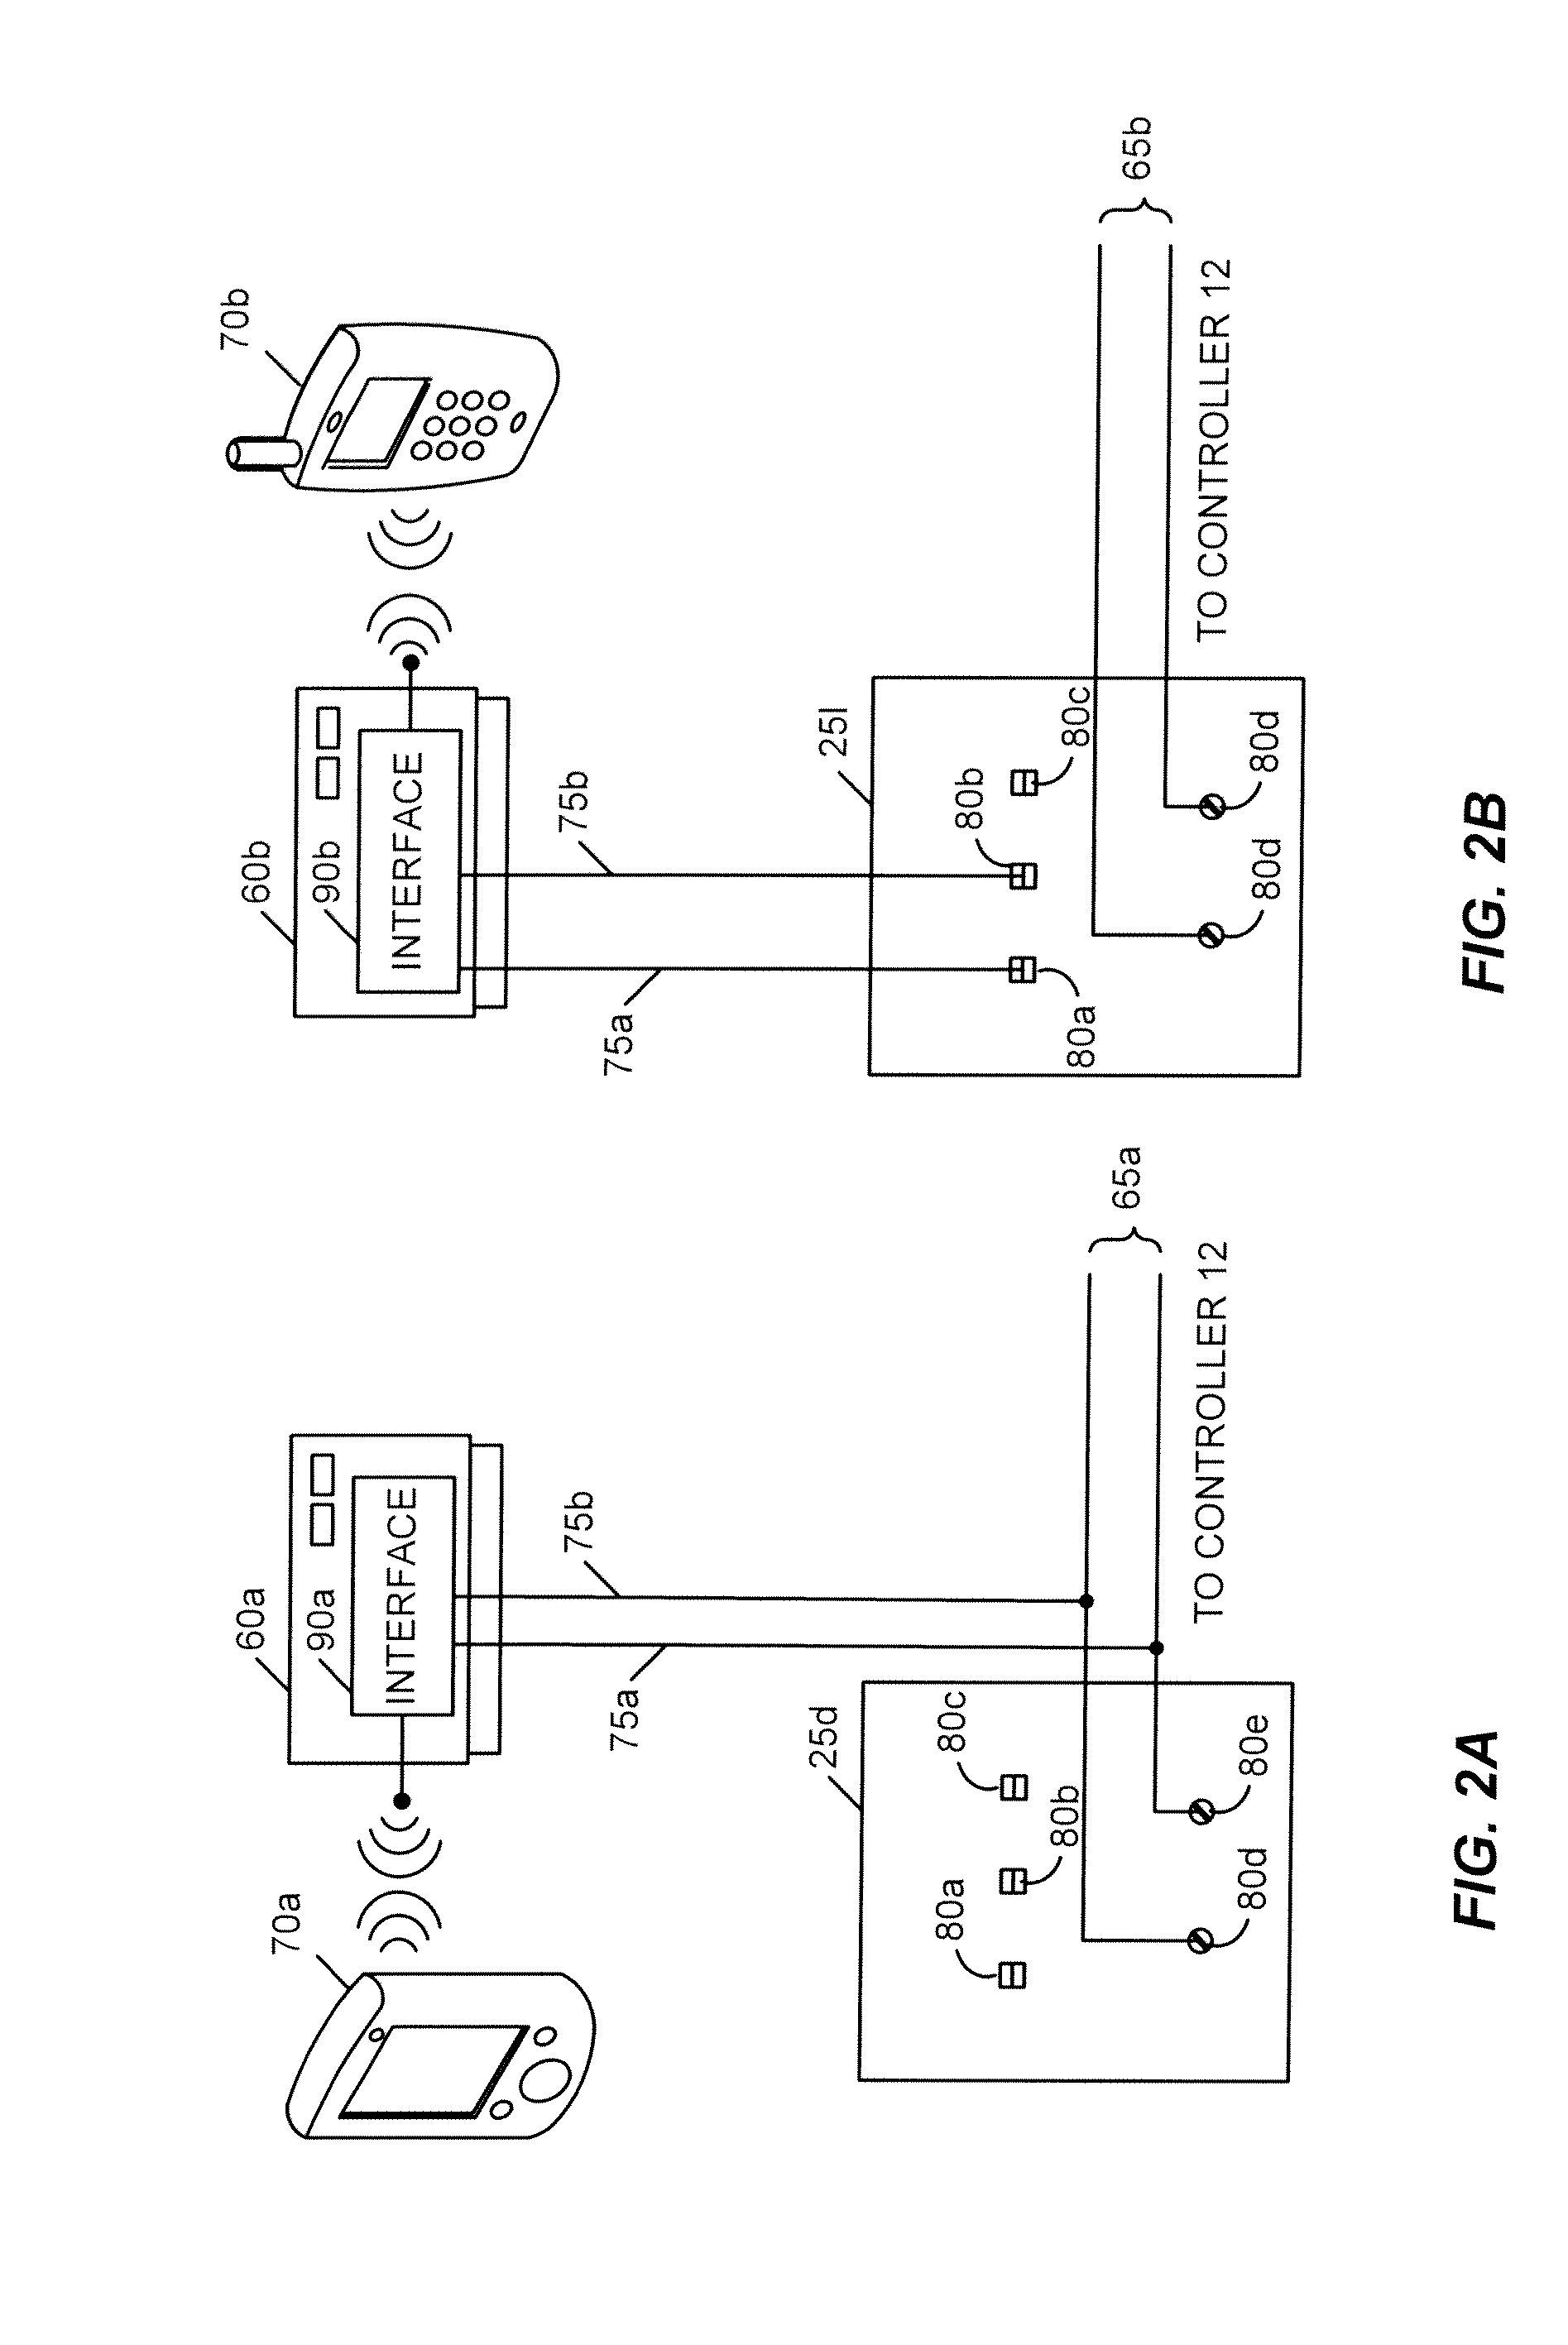 Method and Apparatus for Operating Field Devices via a Portable Communicator